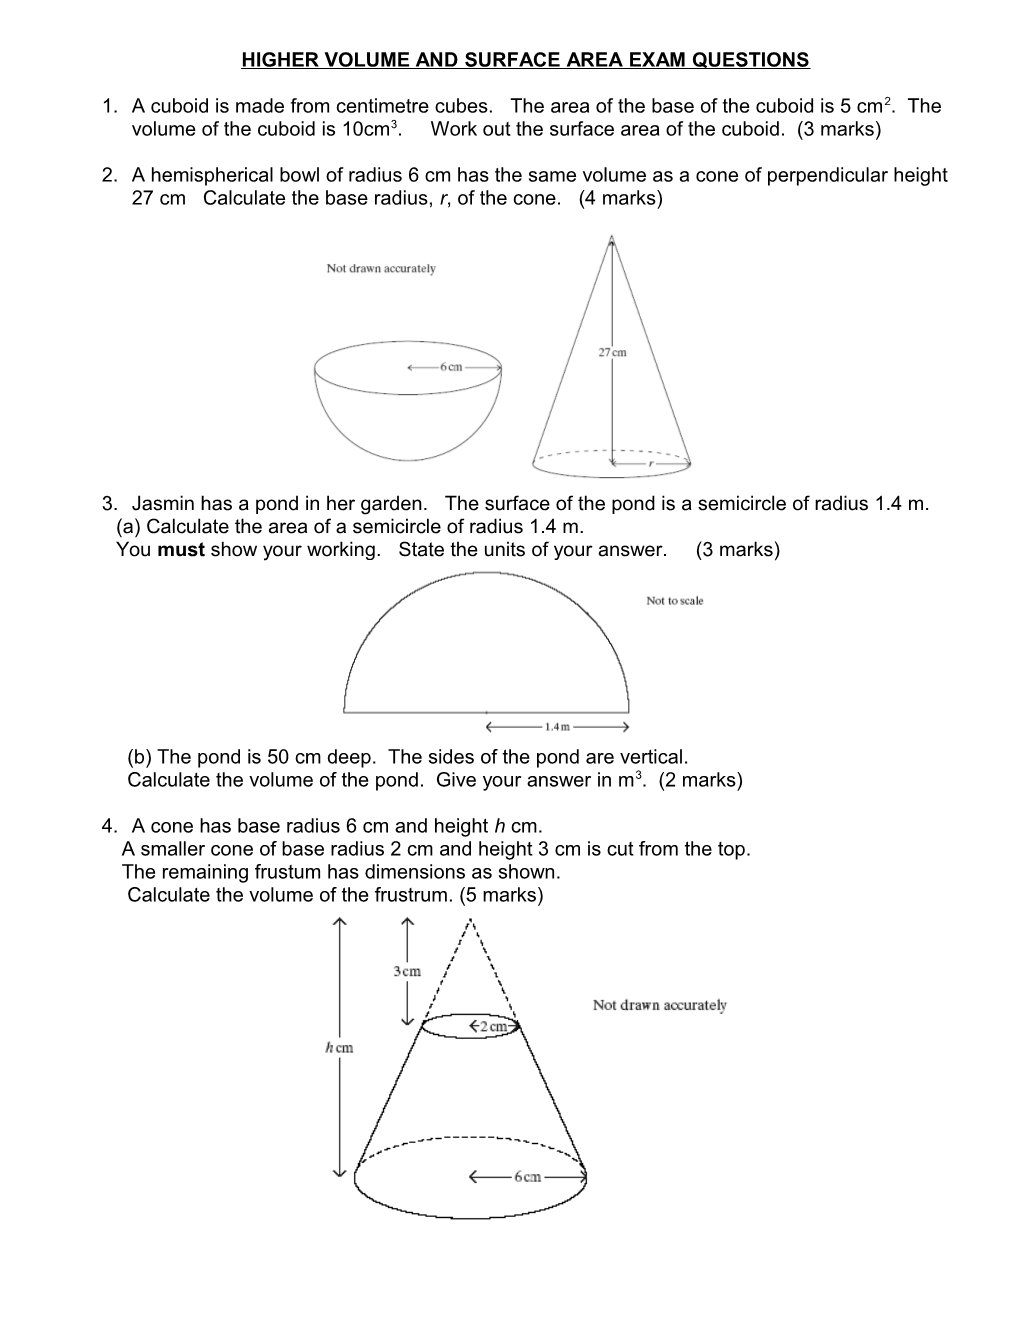 Higher Volume and Surface Area Exam Questions